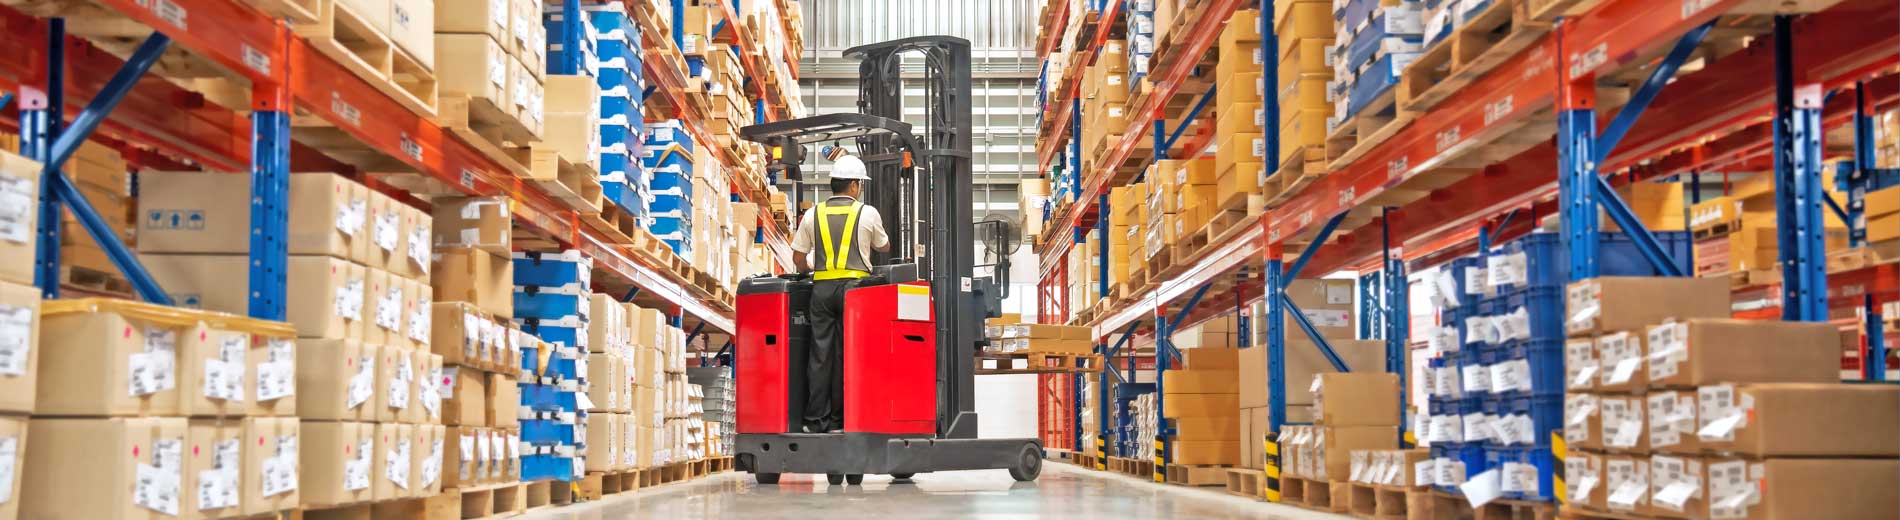 Fork lift truck working in a warehouse